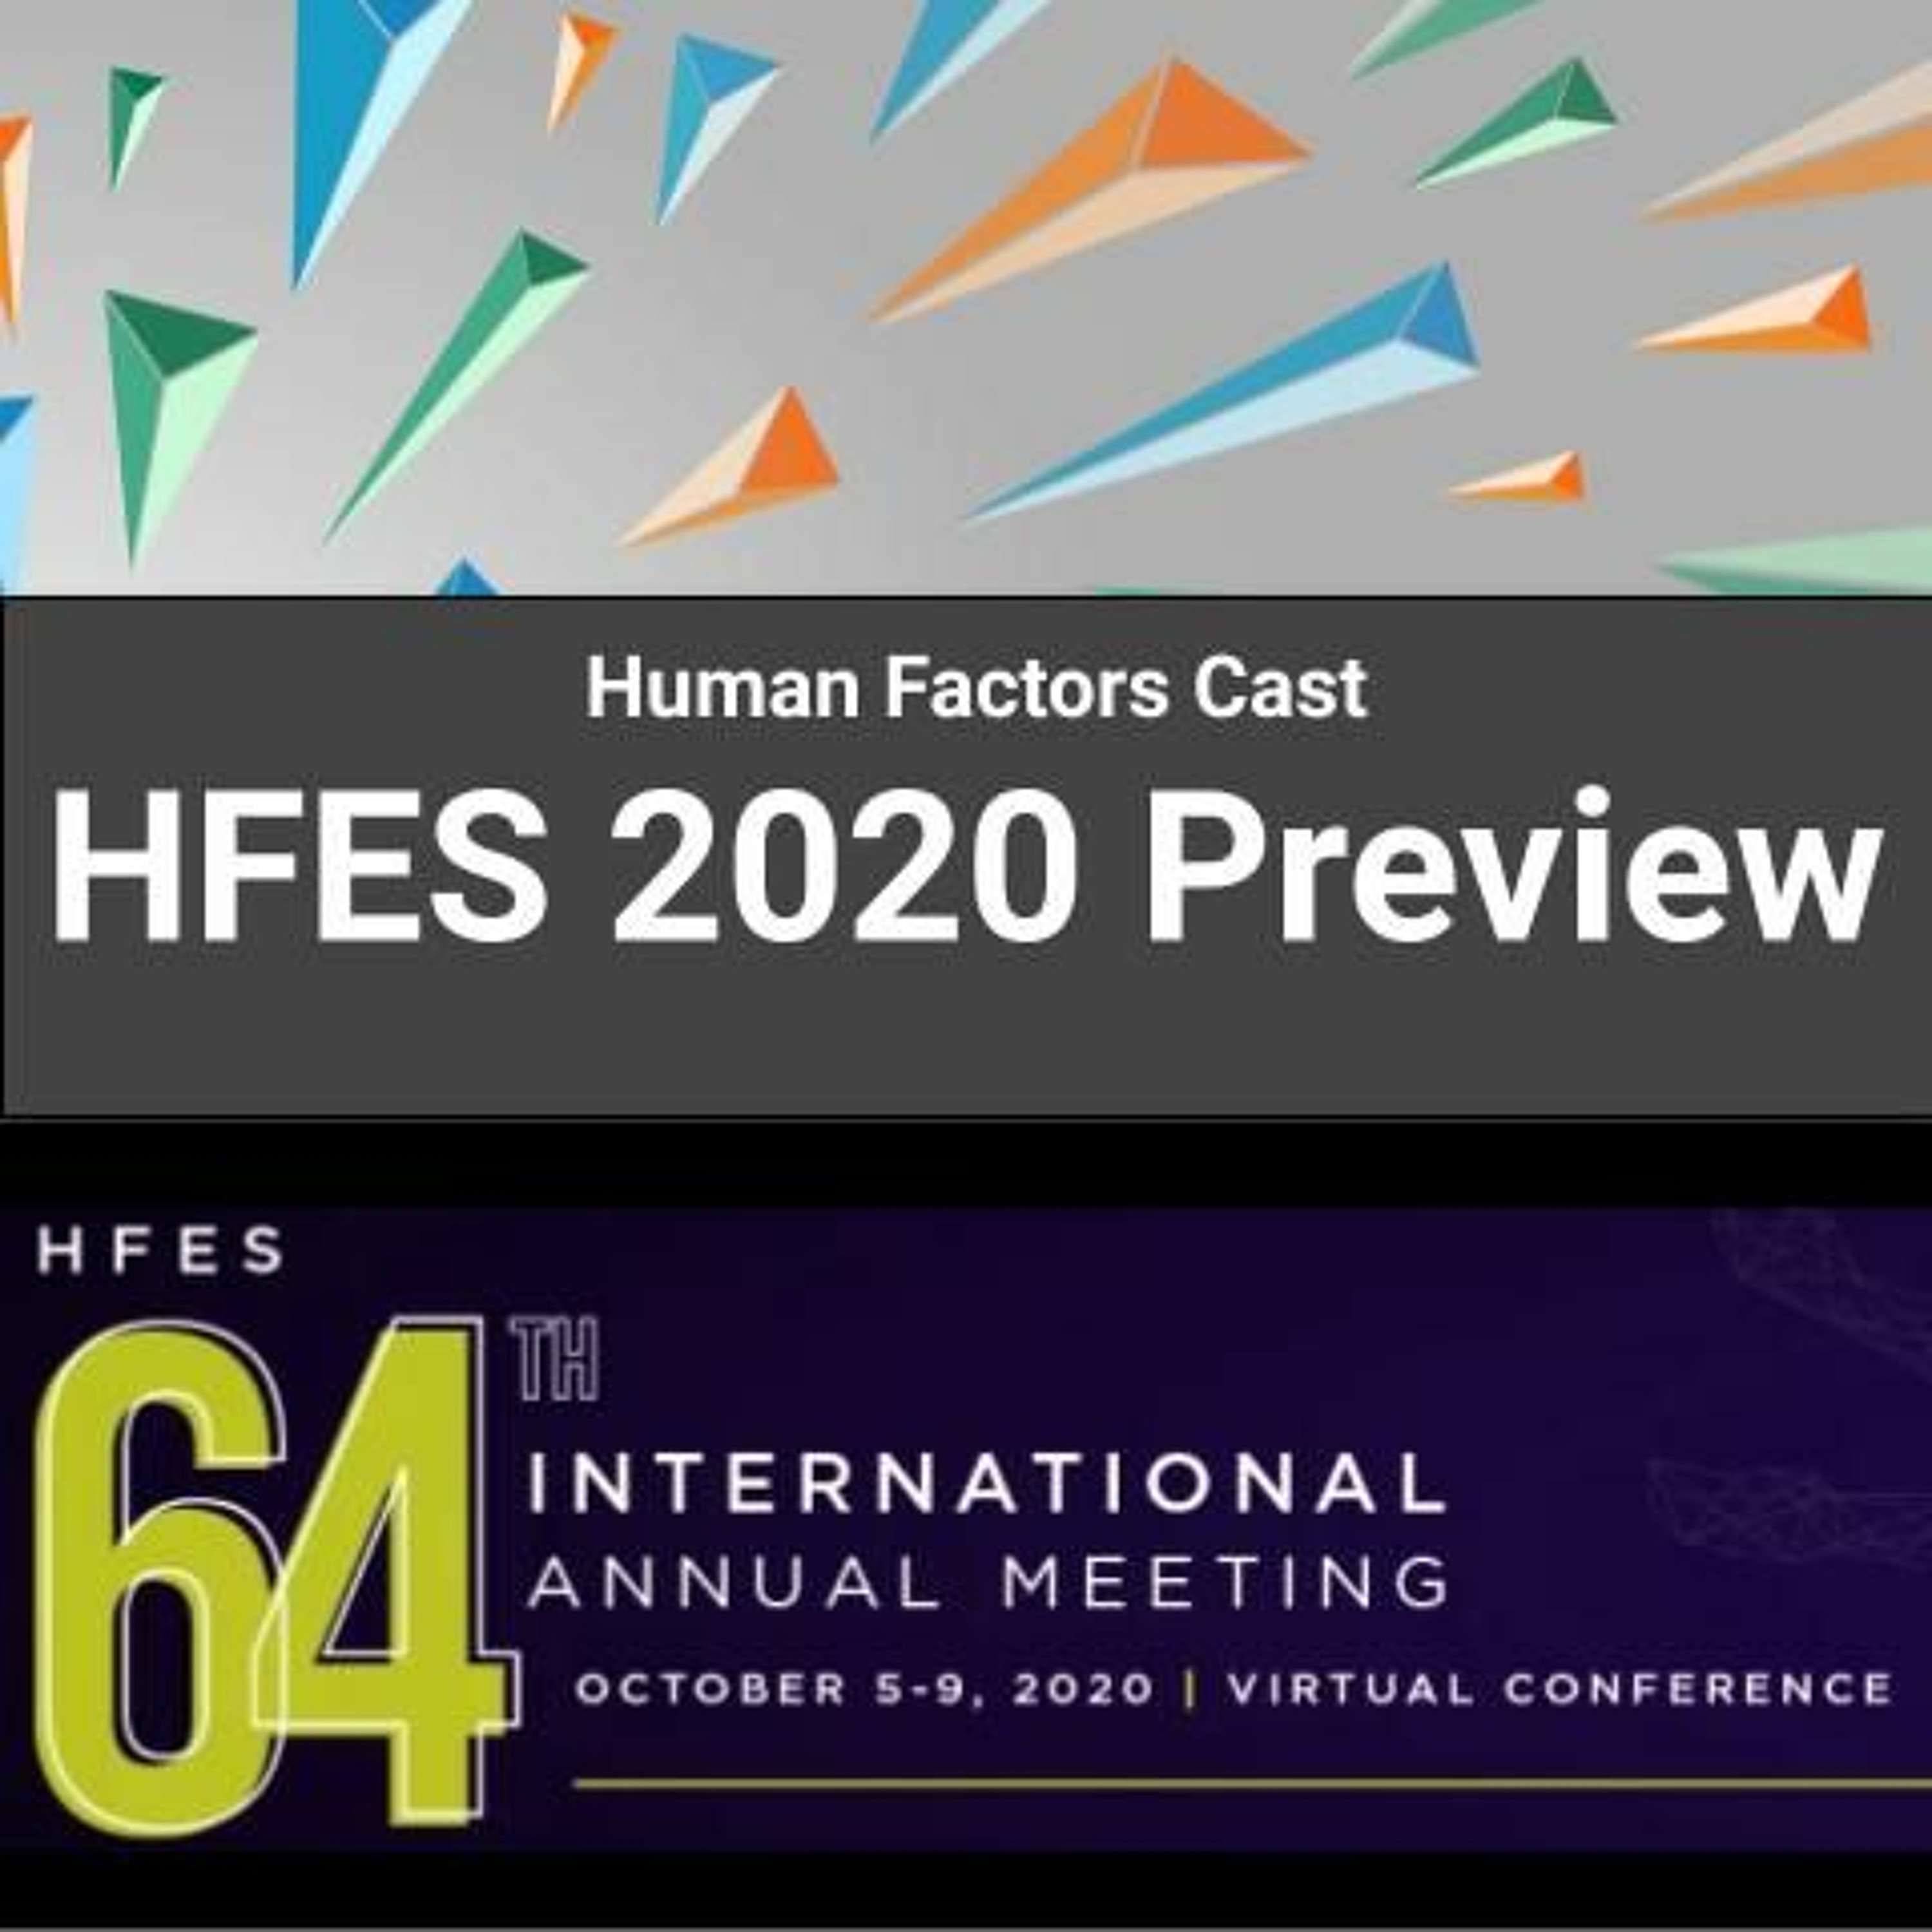 #HFES2020 Preview